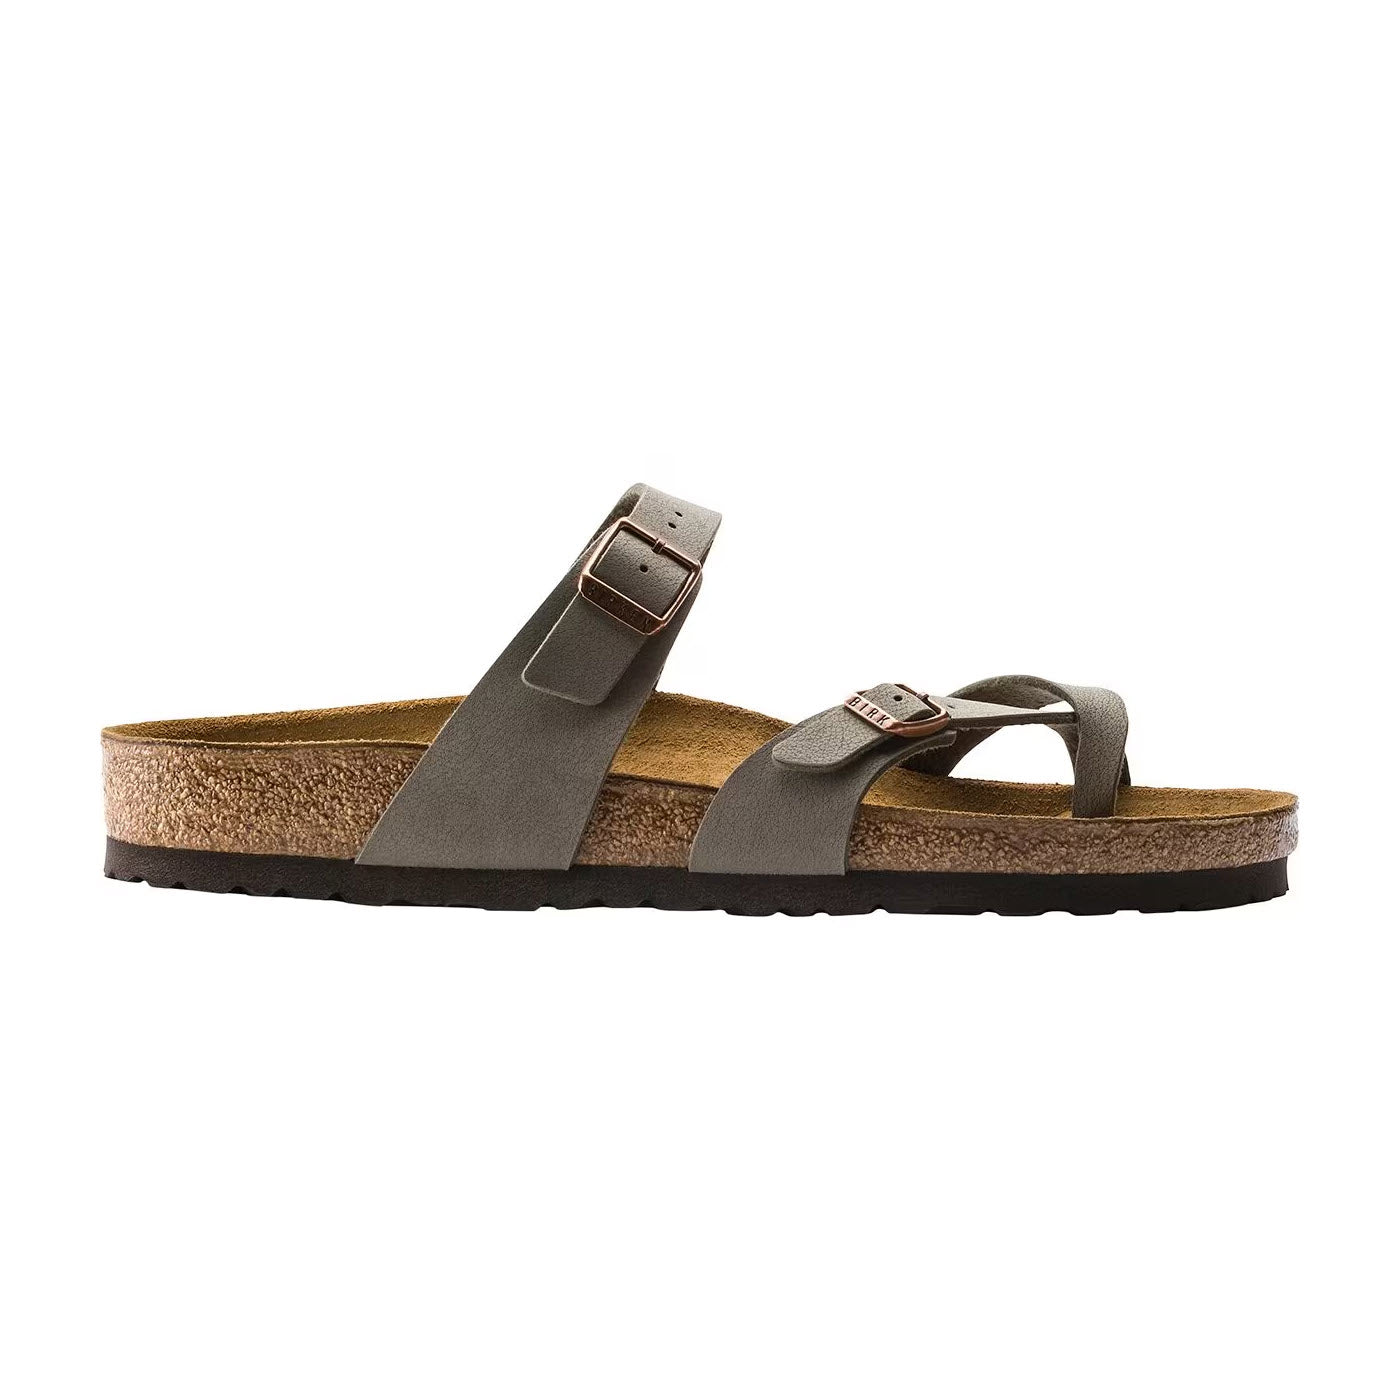 Single brown Birkenstock Mayari Birkibuc Stone sandal with buckle straps and cork footbed isolated on a white background.